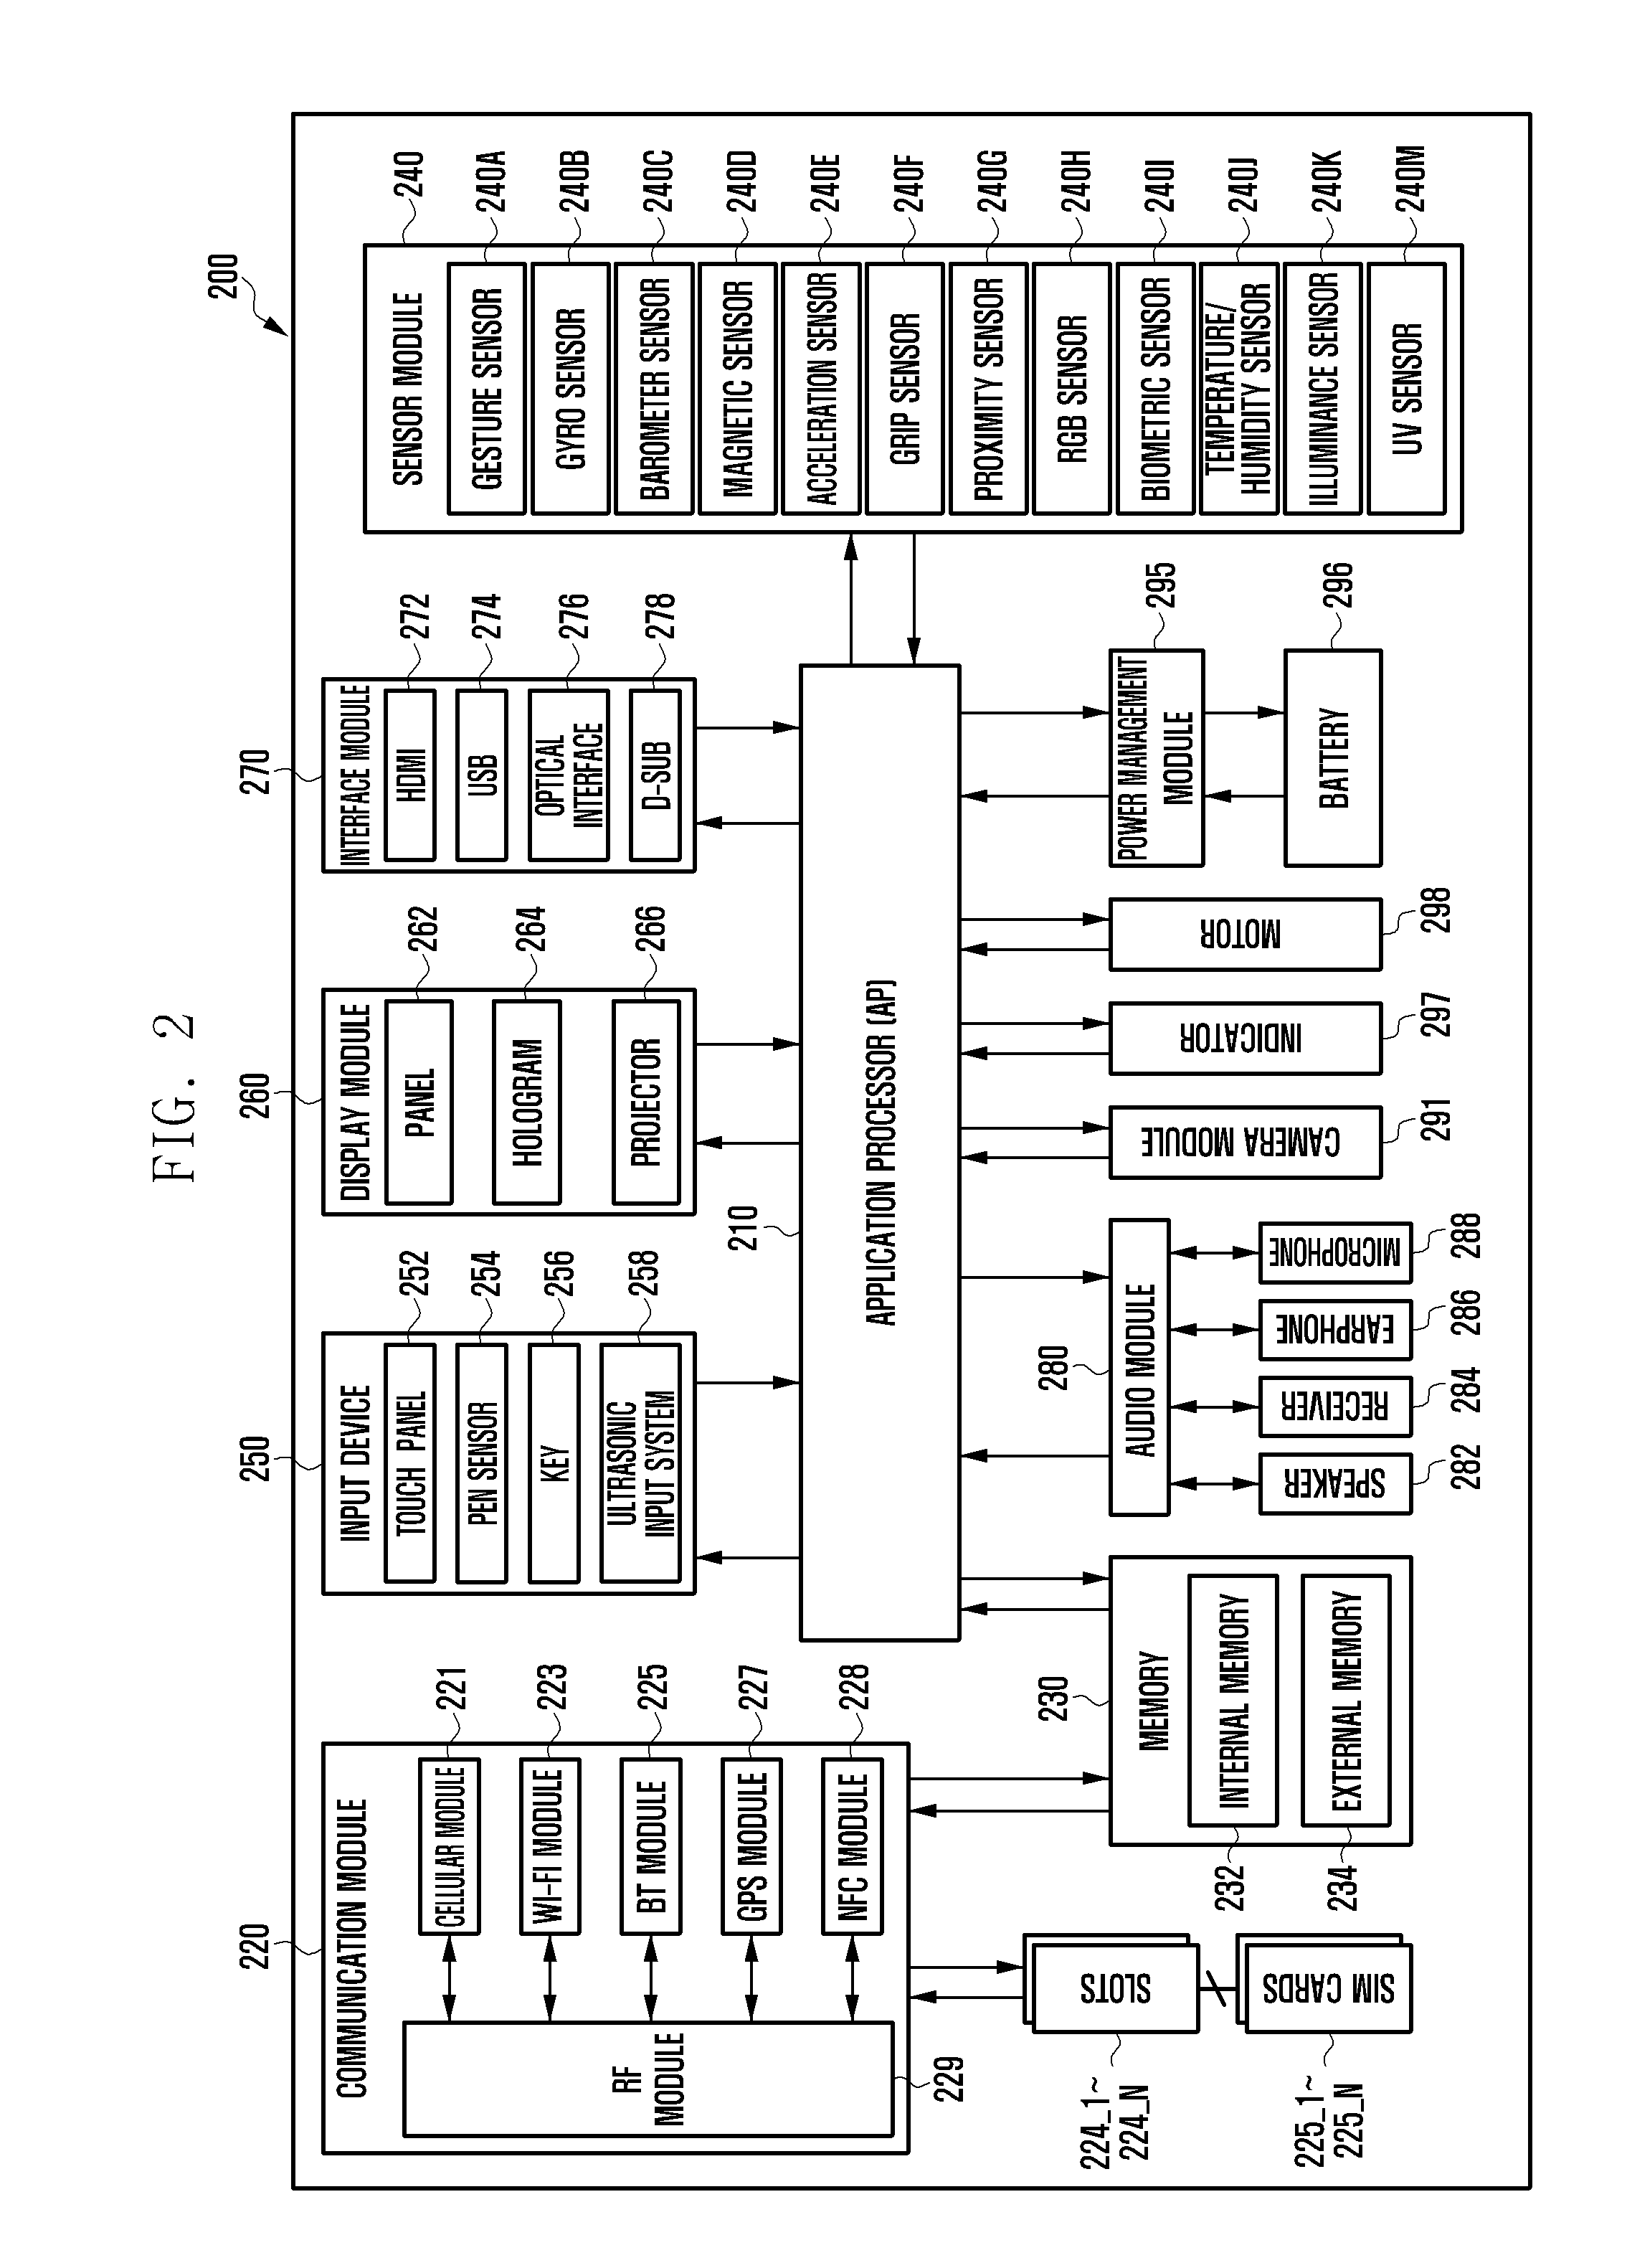 Display control method and protective cover in electronic device